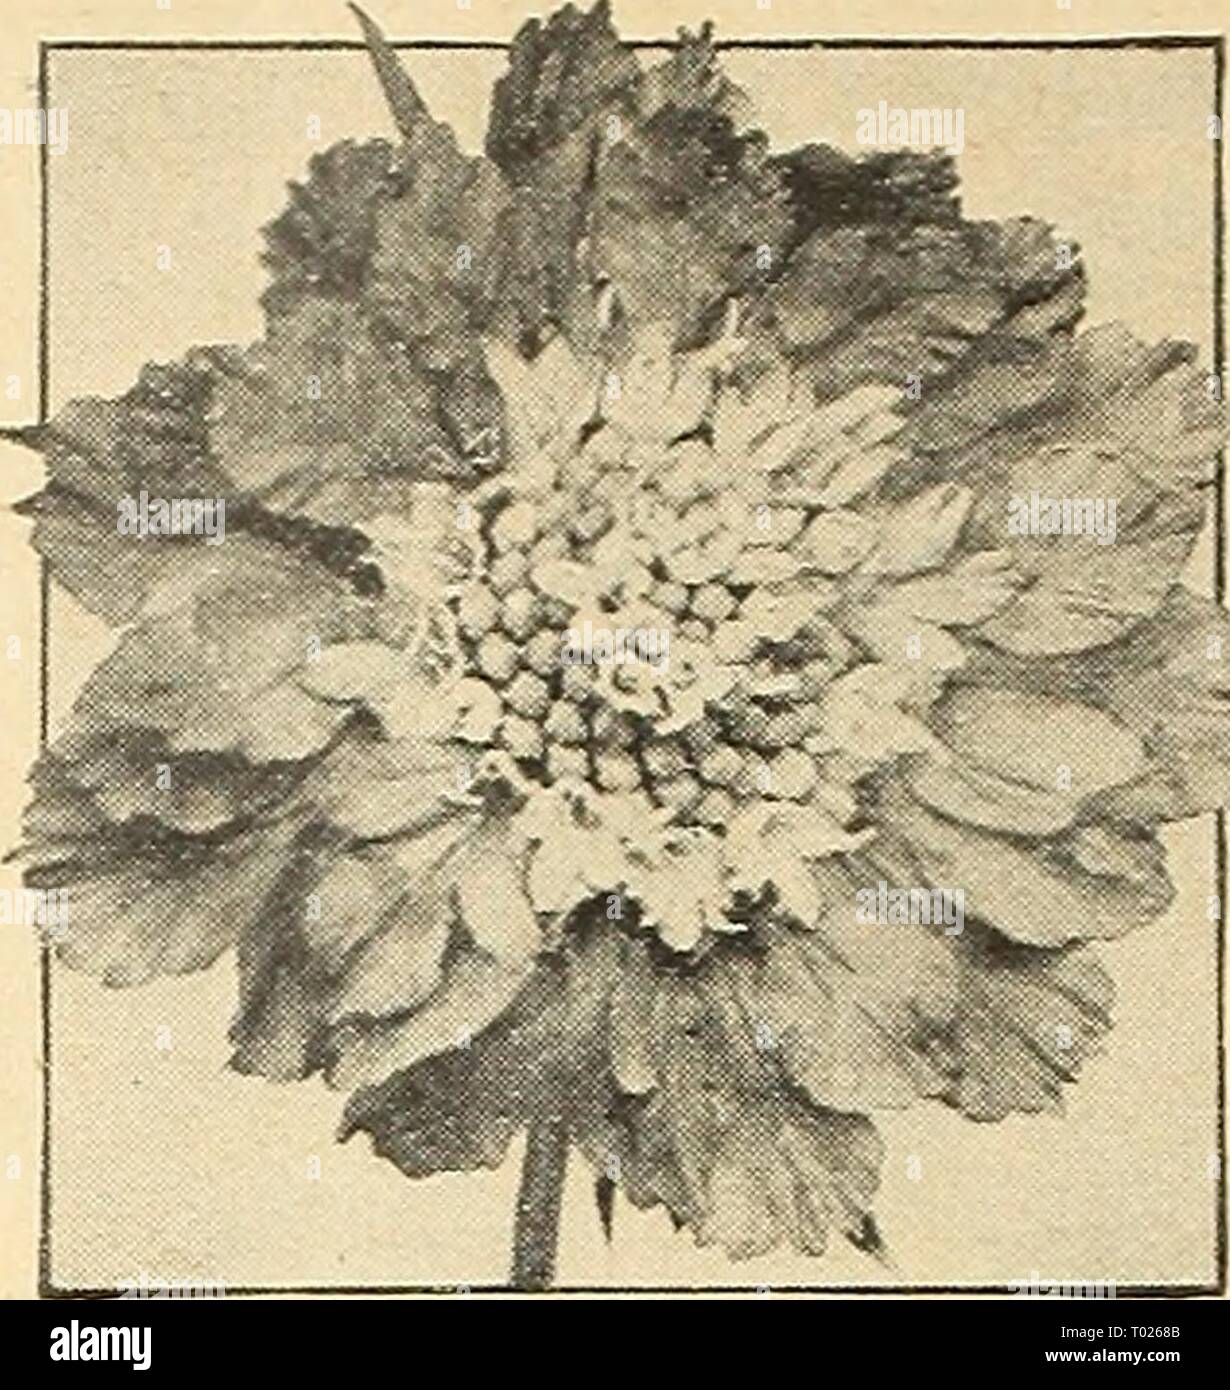 Dreer's garden book for 1943 . dreersgardenbook1943henr Year: 1943  Large-Flowering Scabiosa Mixed Large-Flowering Annual Scabiosa ® Mourning Bride, Siceet Scabious Pincushion Flower A universal favorite because it is easy to grow and blooms profusely from midsummer until frost. The beautiful and richly colored blooms are carried on long, slender stems. The plants stand Zyi to 3 feet tall. Most effective for gar- den display and unexcelled for cutting. 3873 Azure Fairy. Clear lavender- blue flowers of exceptional beauty. 3875 Blue Cockade. Rich blue. ' 3876 Cattleya. A lovely orchid shade. 387 Stock Photo